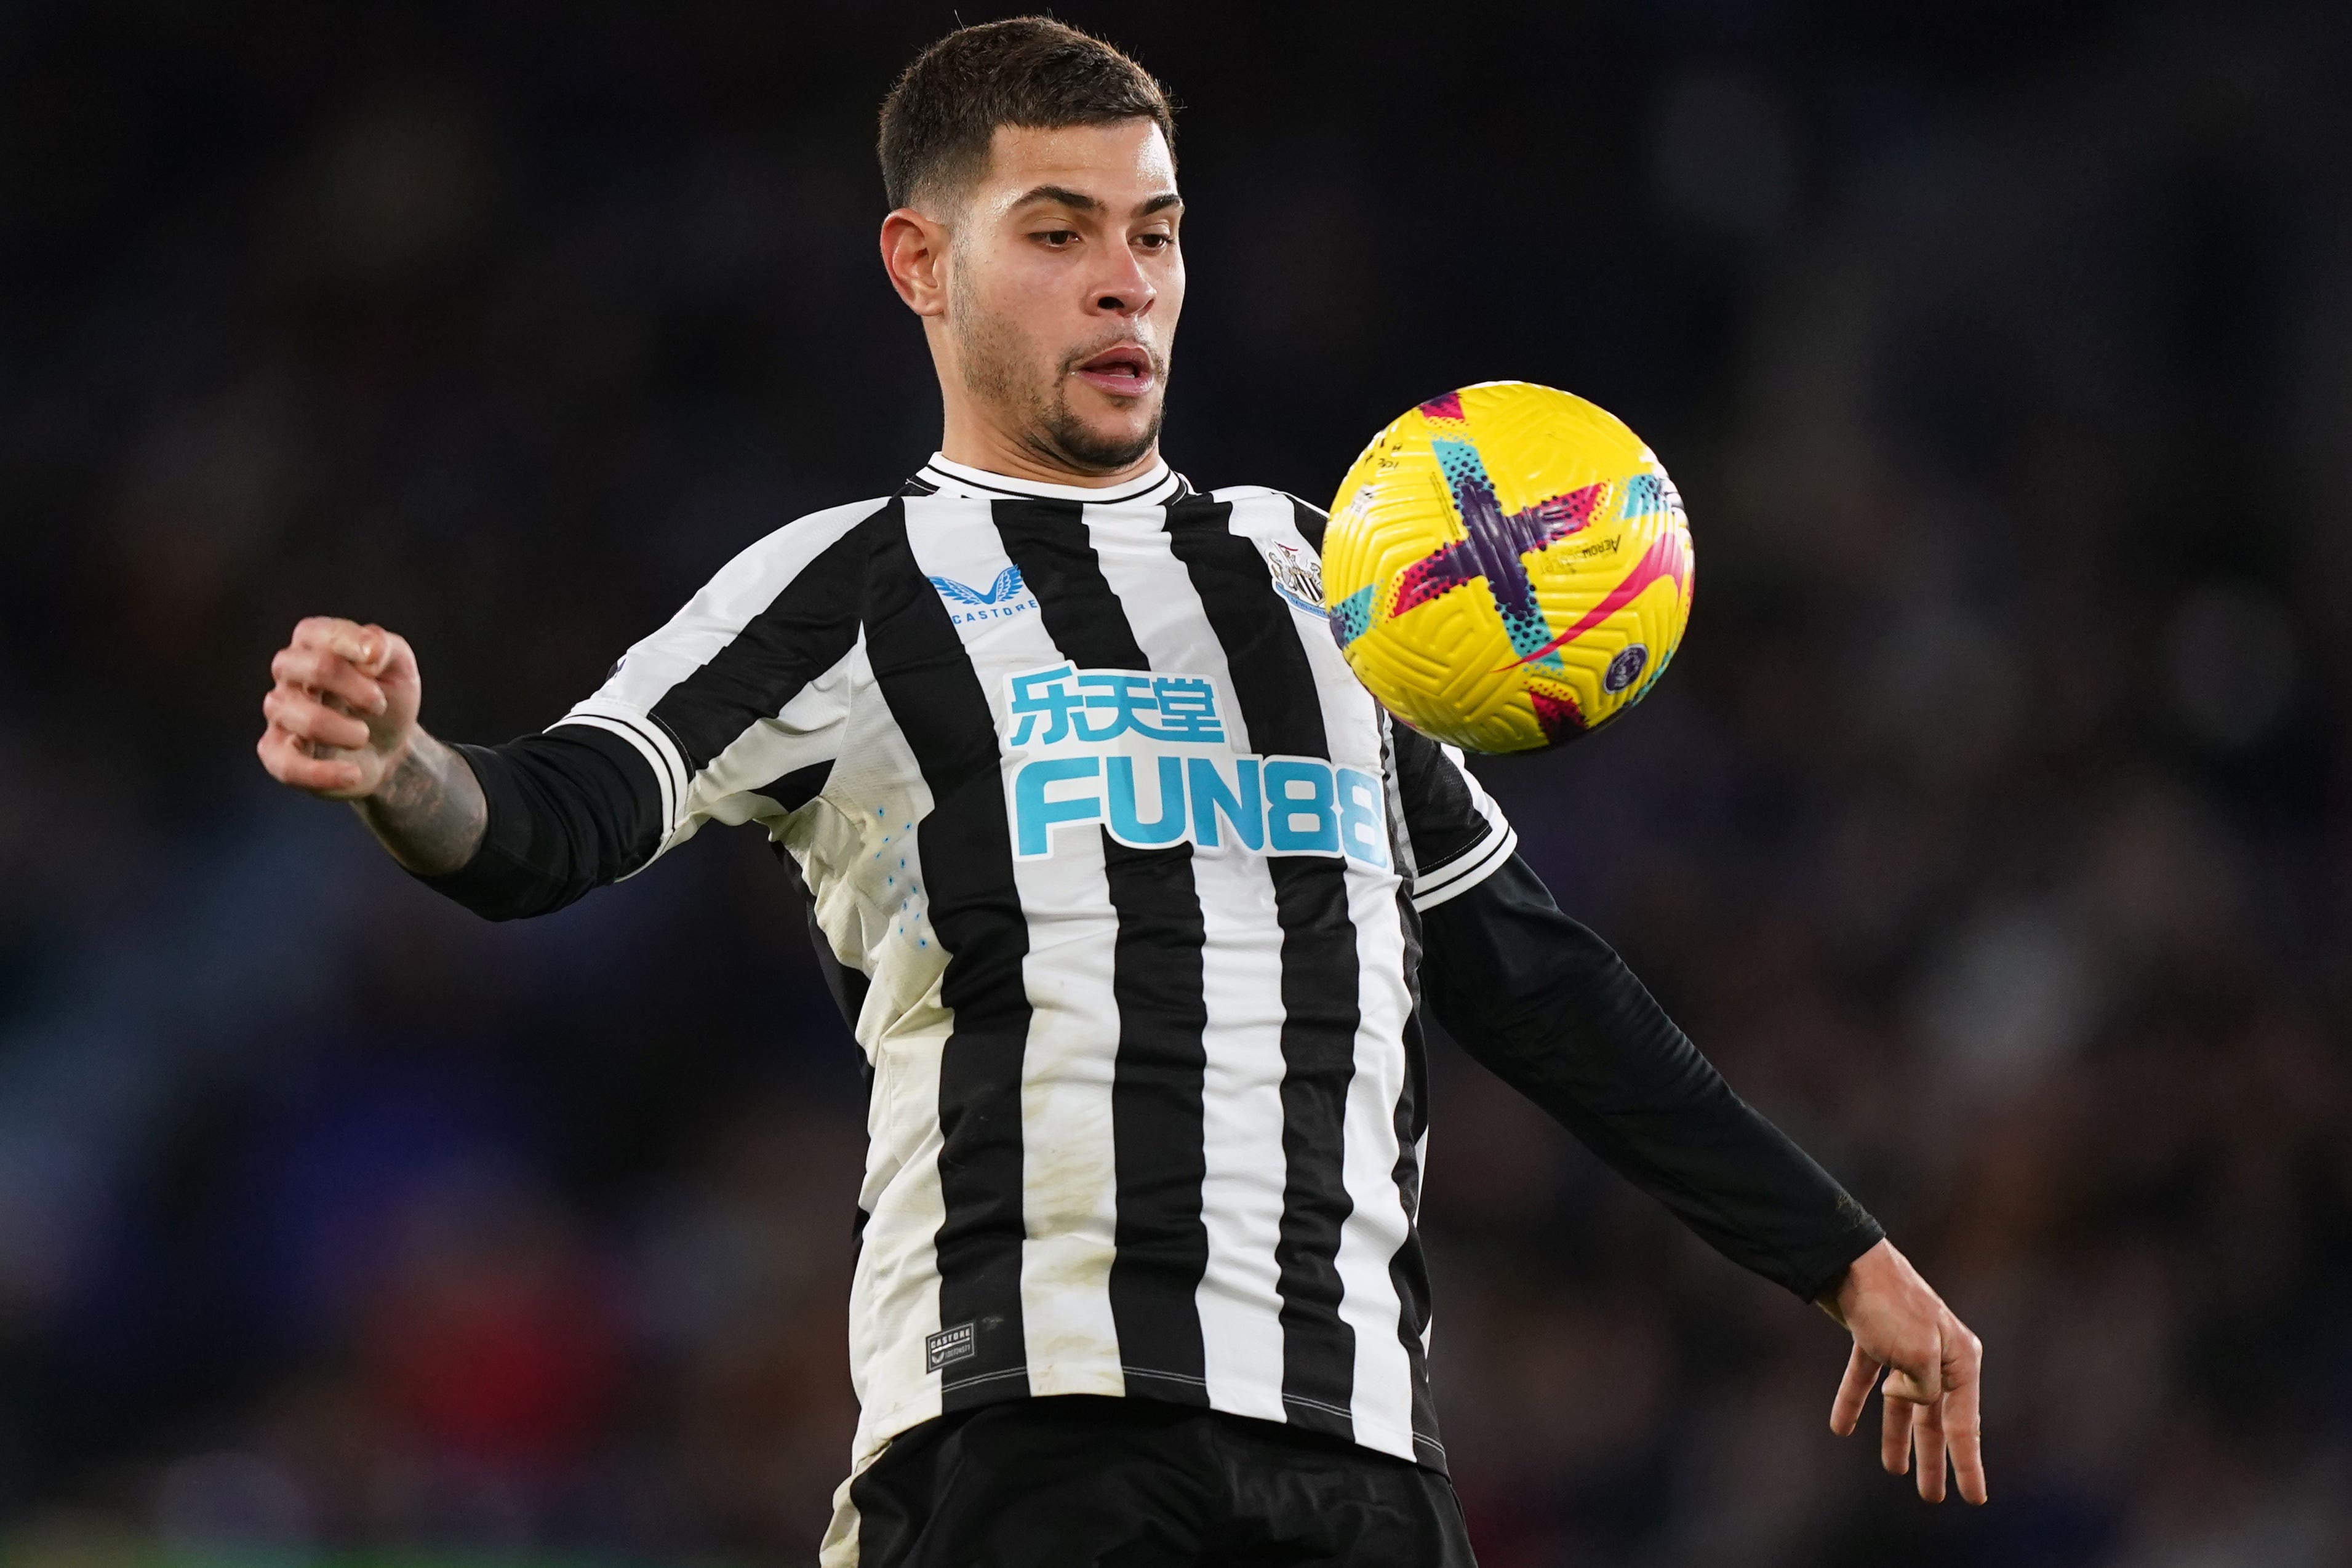 Bruno Guimaraes has noticed a change in attitude towards his Newcastle side (Mike Egerton/PA)